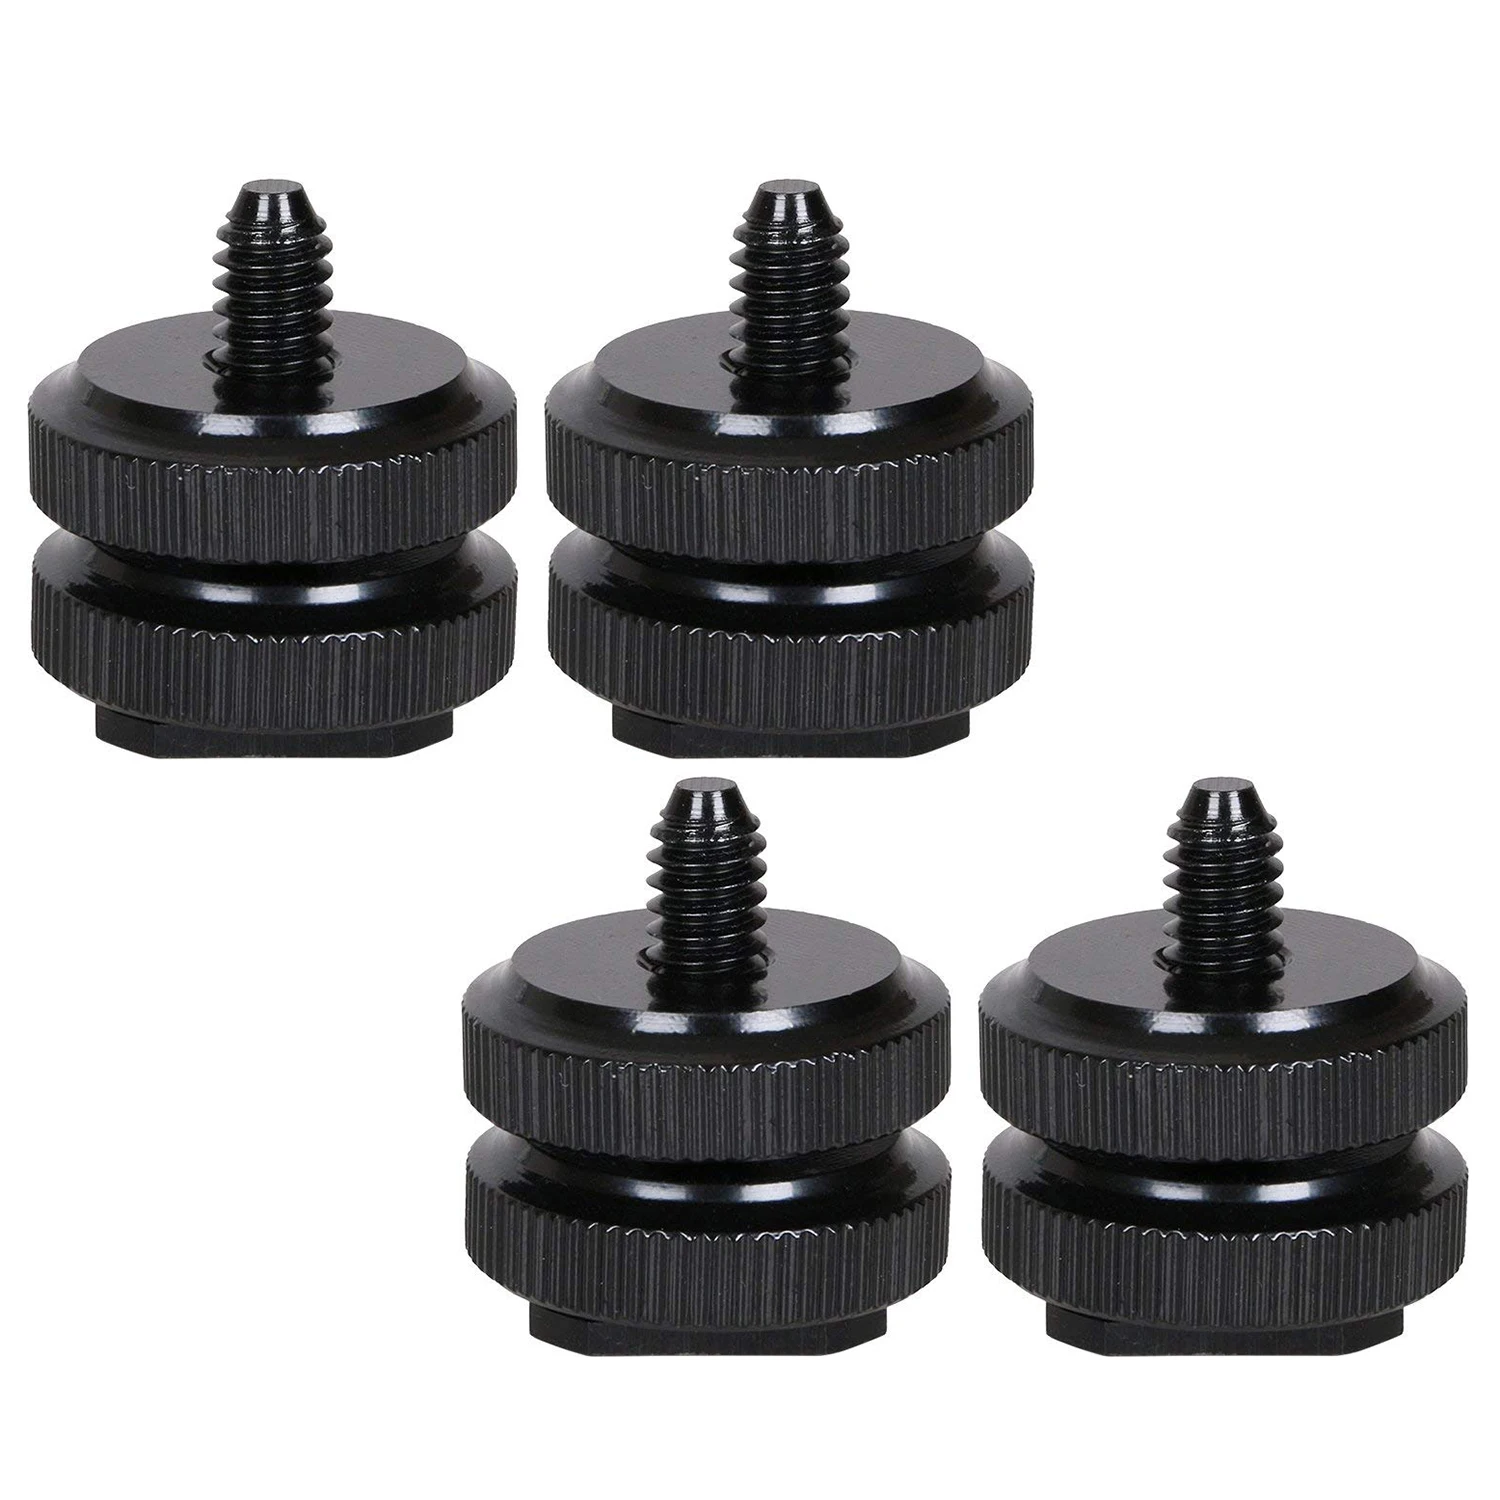 

Camera Hot Shoe Mount to 1/4inch-20 Tripod Screw Adapter,Flash Shoe Mount for DSLR Camera Rig (Pack of 4)